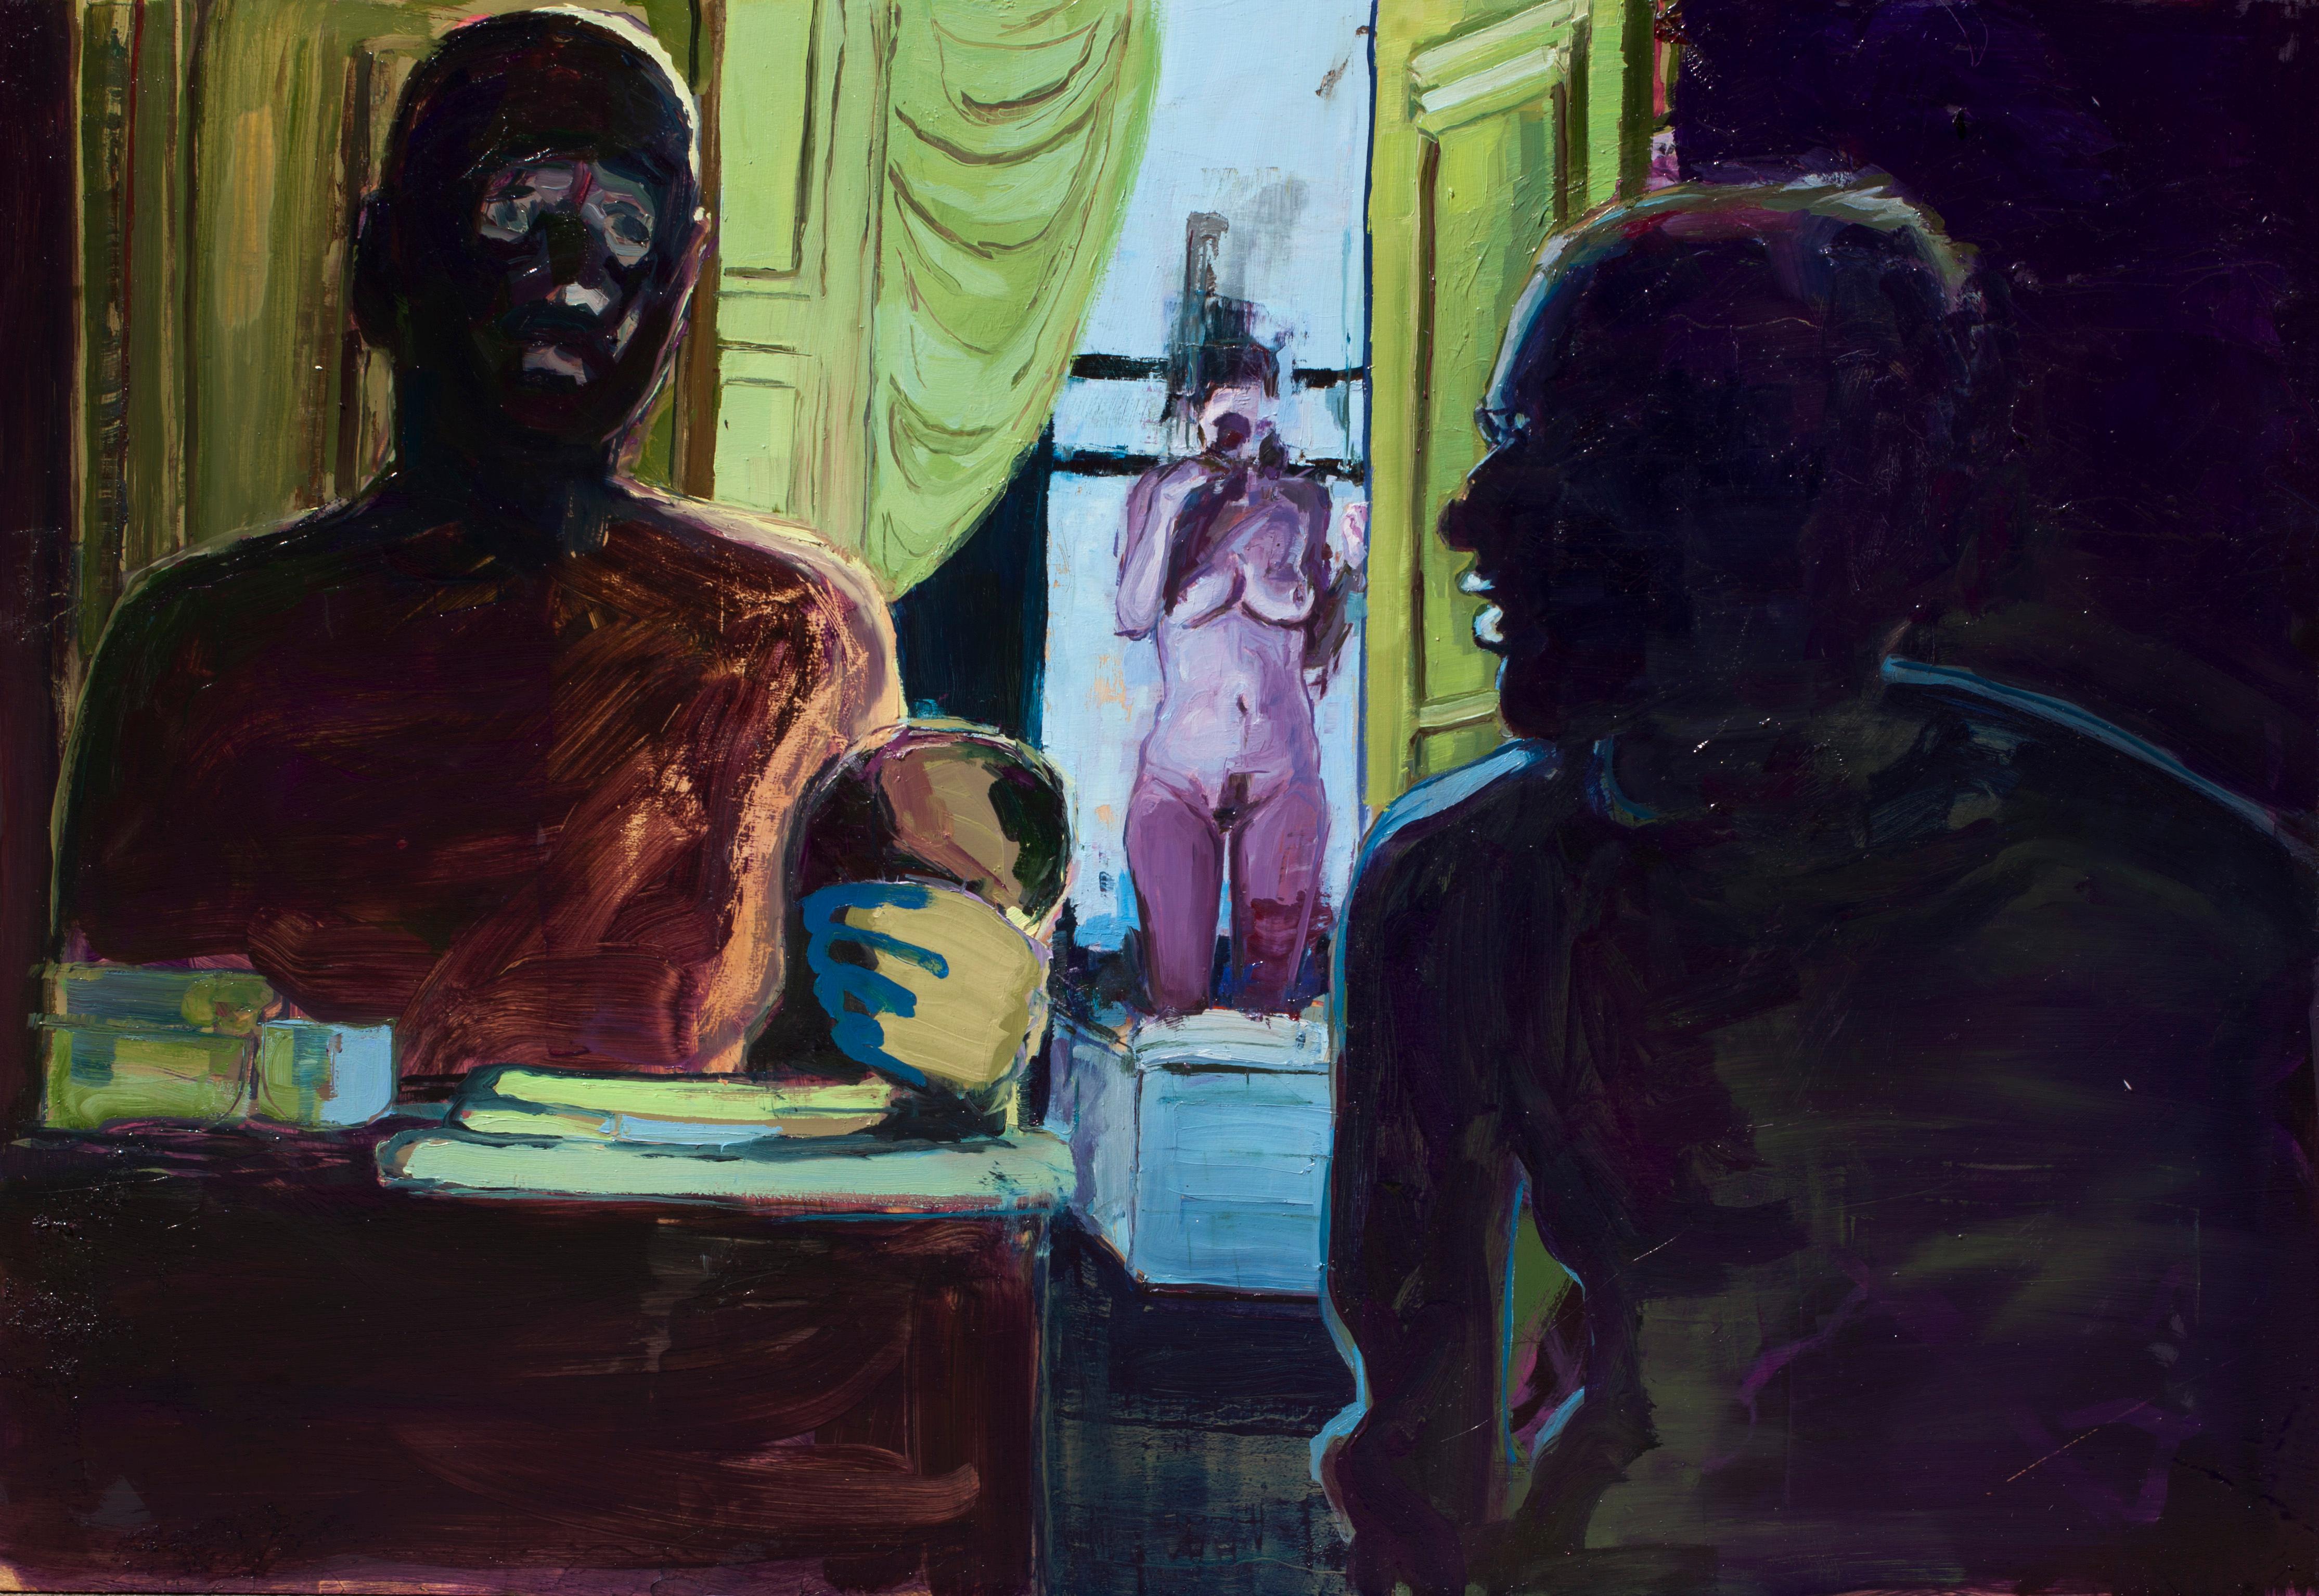 Georgia Hinaris Figurative Painting - Half Men - Figures Cast in Shadow and Female Nude, Bold Colors, Heavy Paint